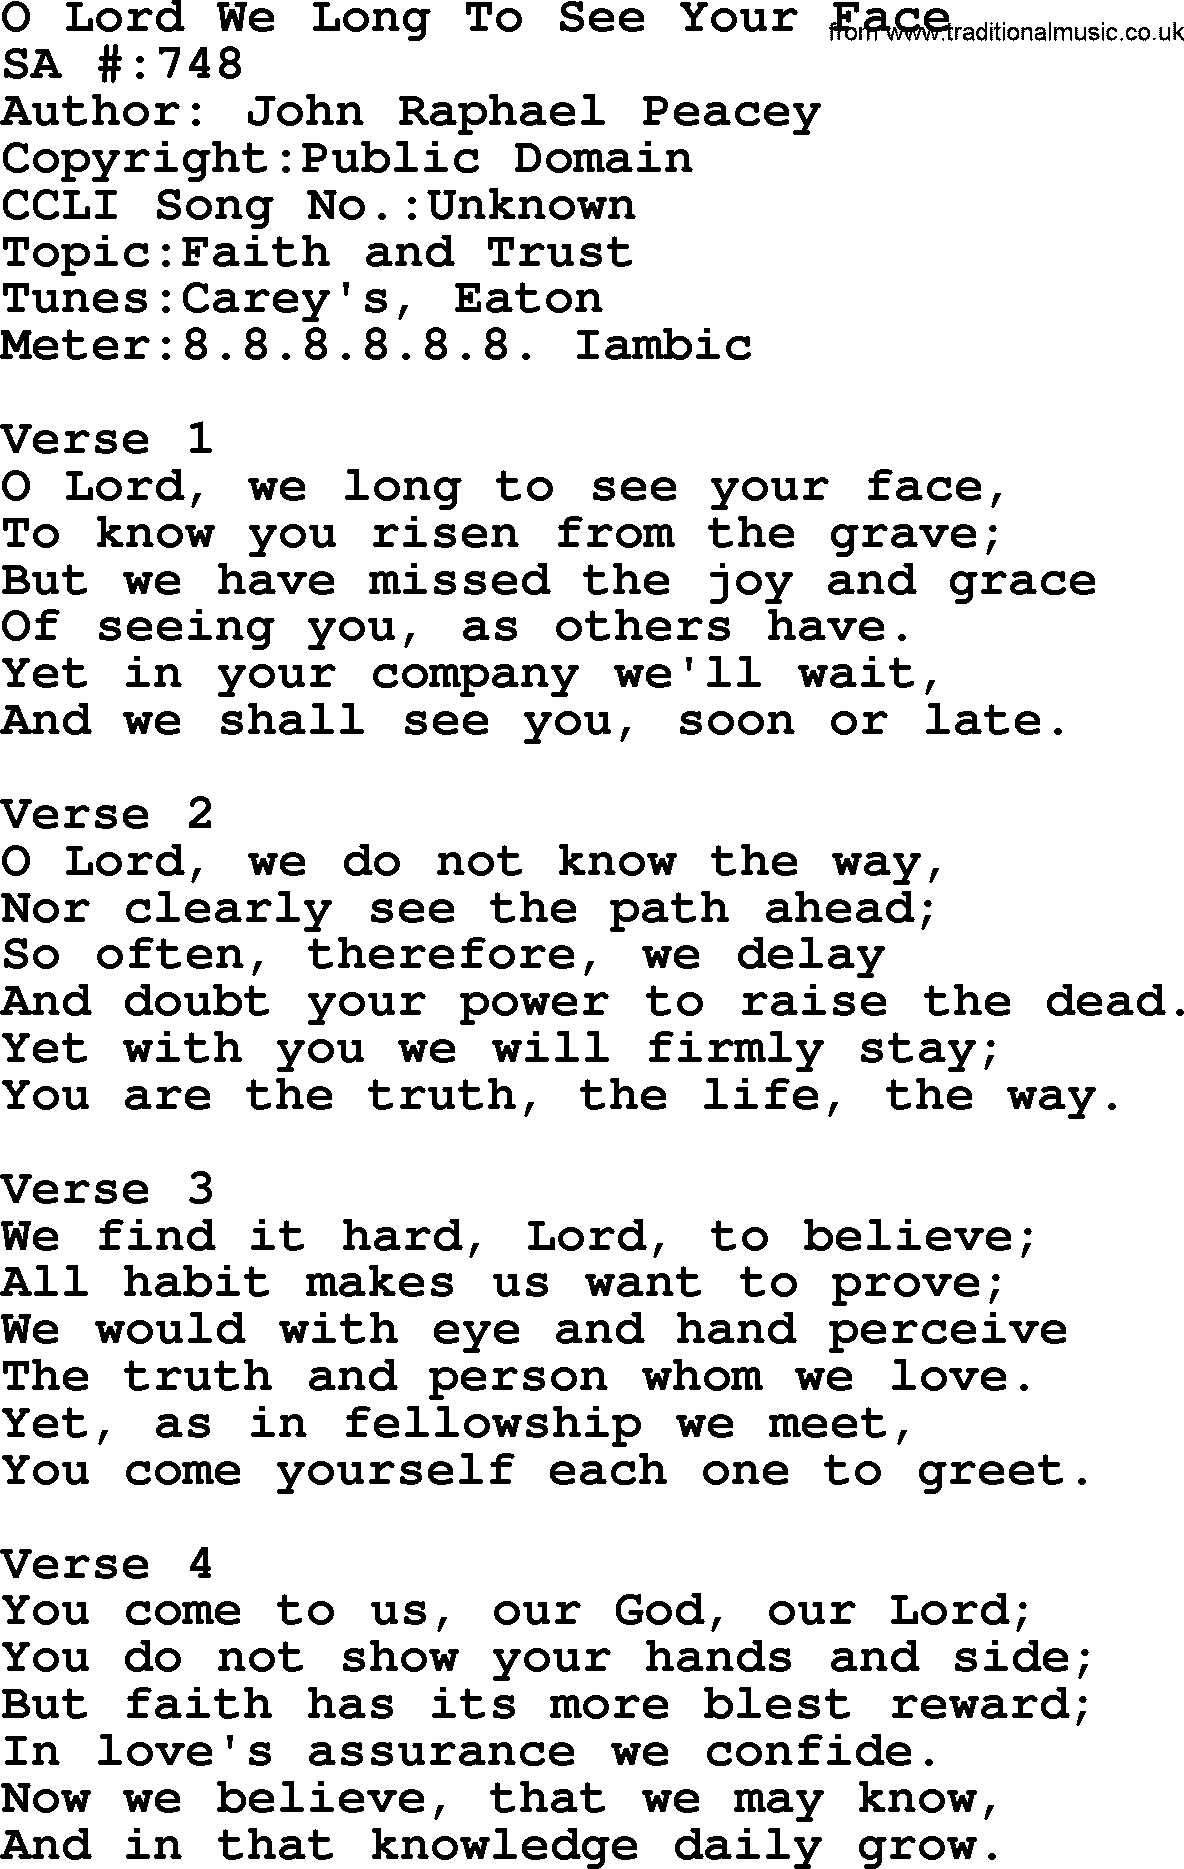 Salvation Army Hymnal, title: O Lord We Long To See Your Face, with lyrics and PDF,